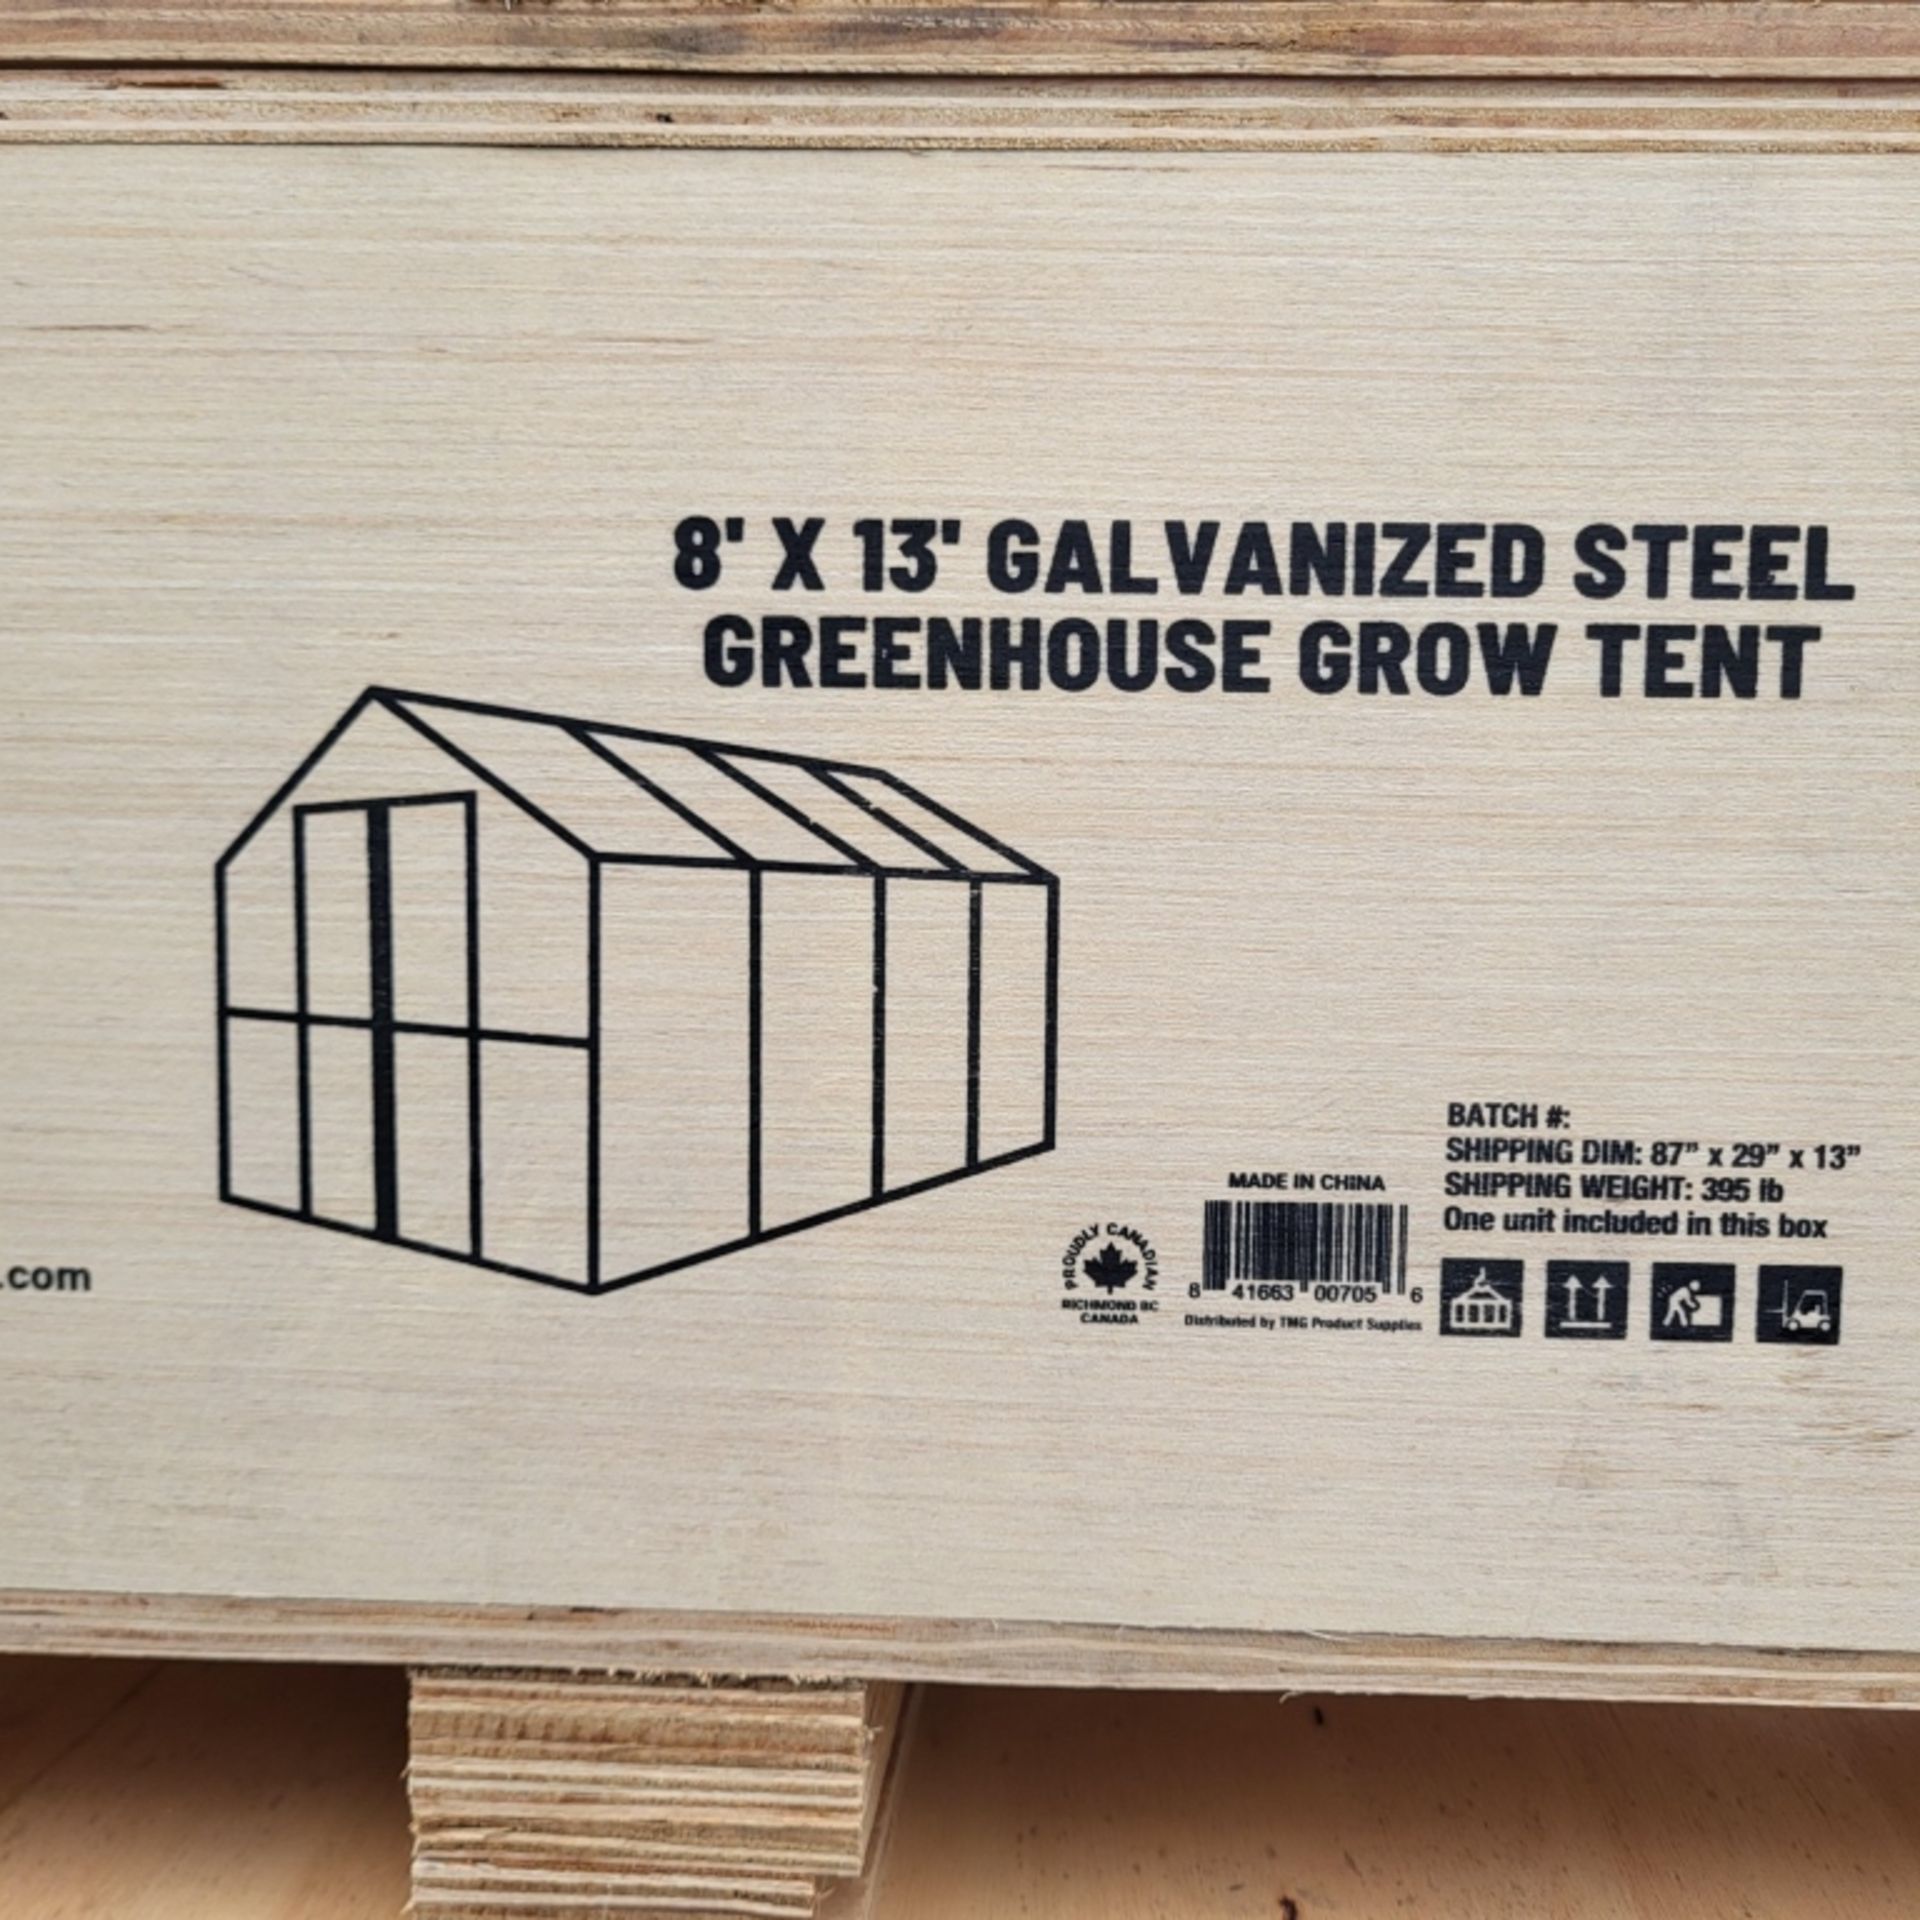 8' by 13' galvanized steel greenhouse grow tent - Image 2 of 3